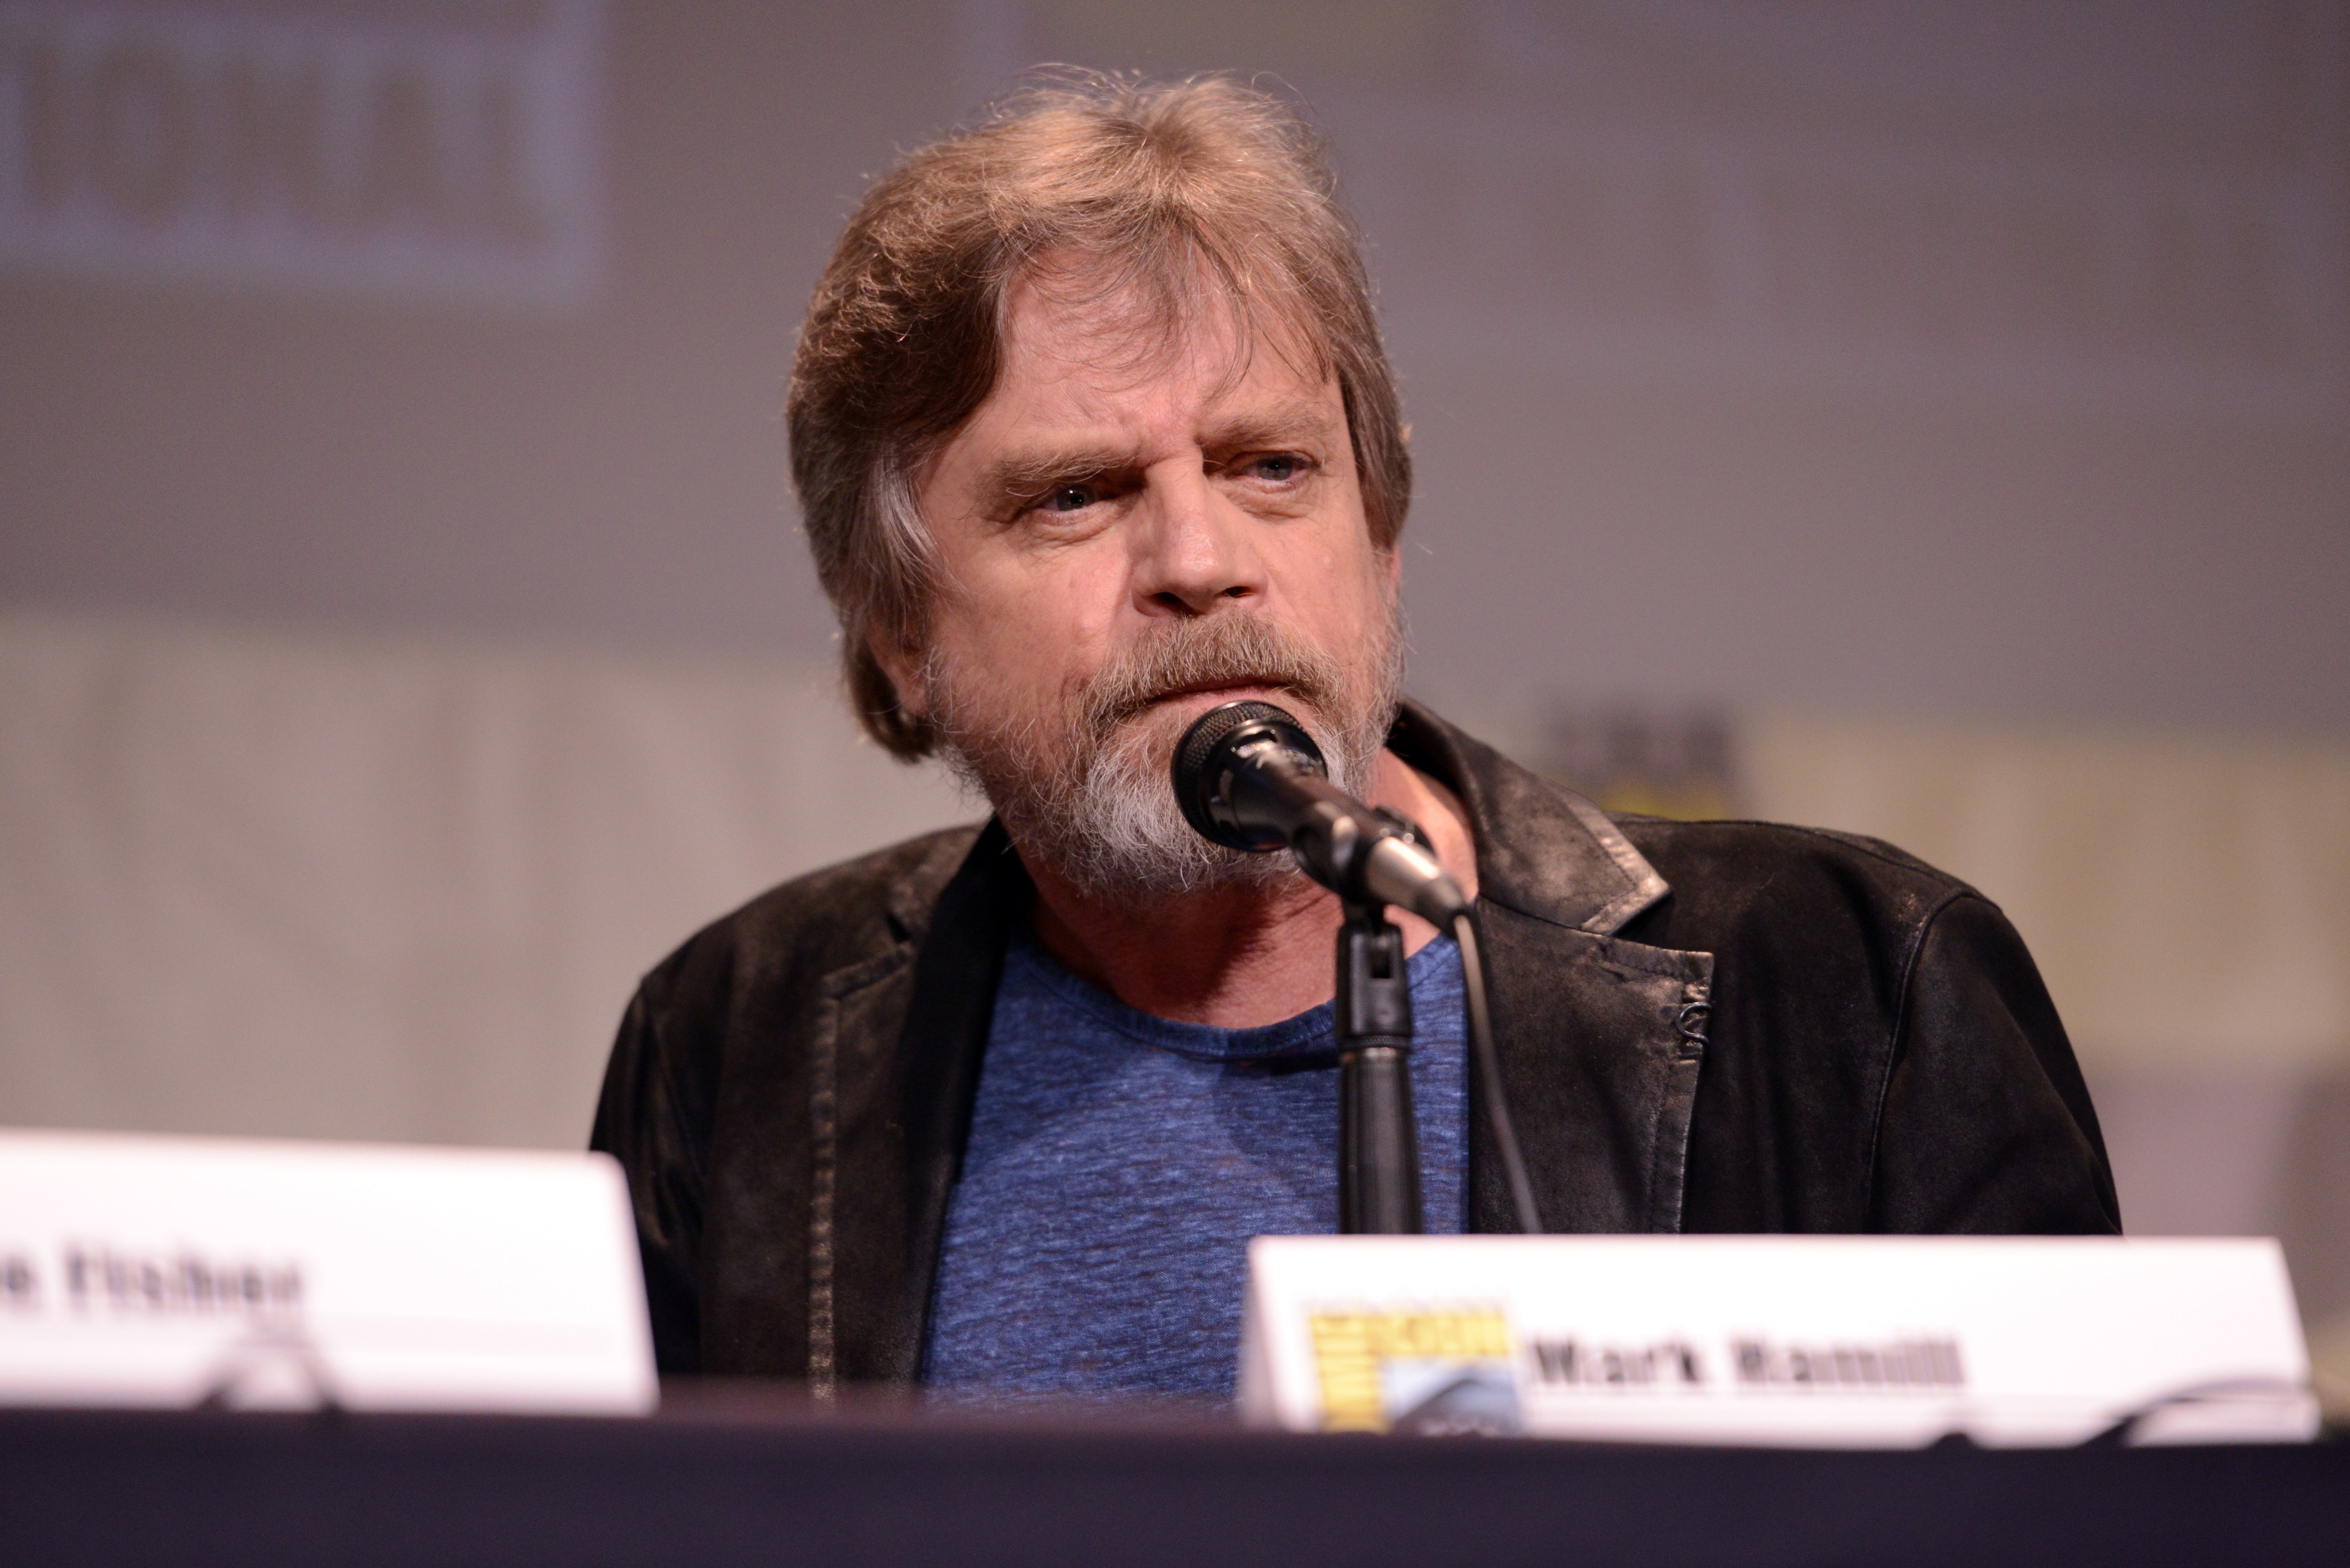 Mark Hamill speaks onstage at the Lucasfilm panel during Comic-Con International 2015 at the San Diego Convention Center on July 10, 2015 in San Diego, California. (Albert L. Ortega—Getty Images)